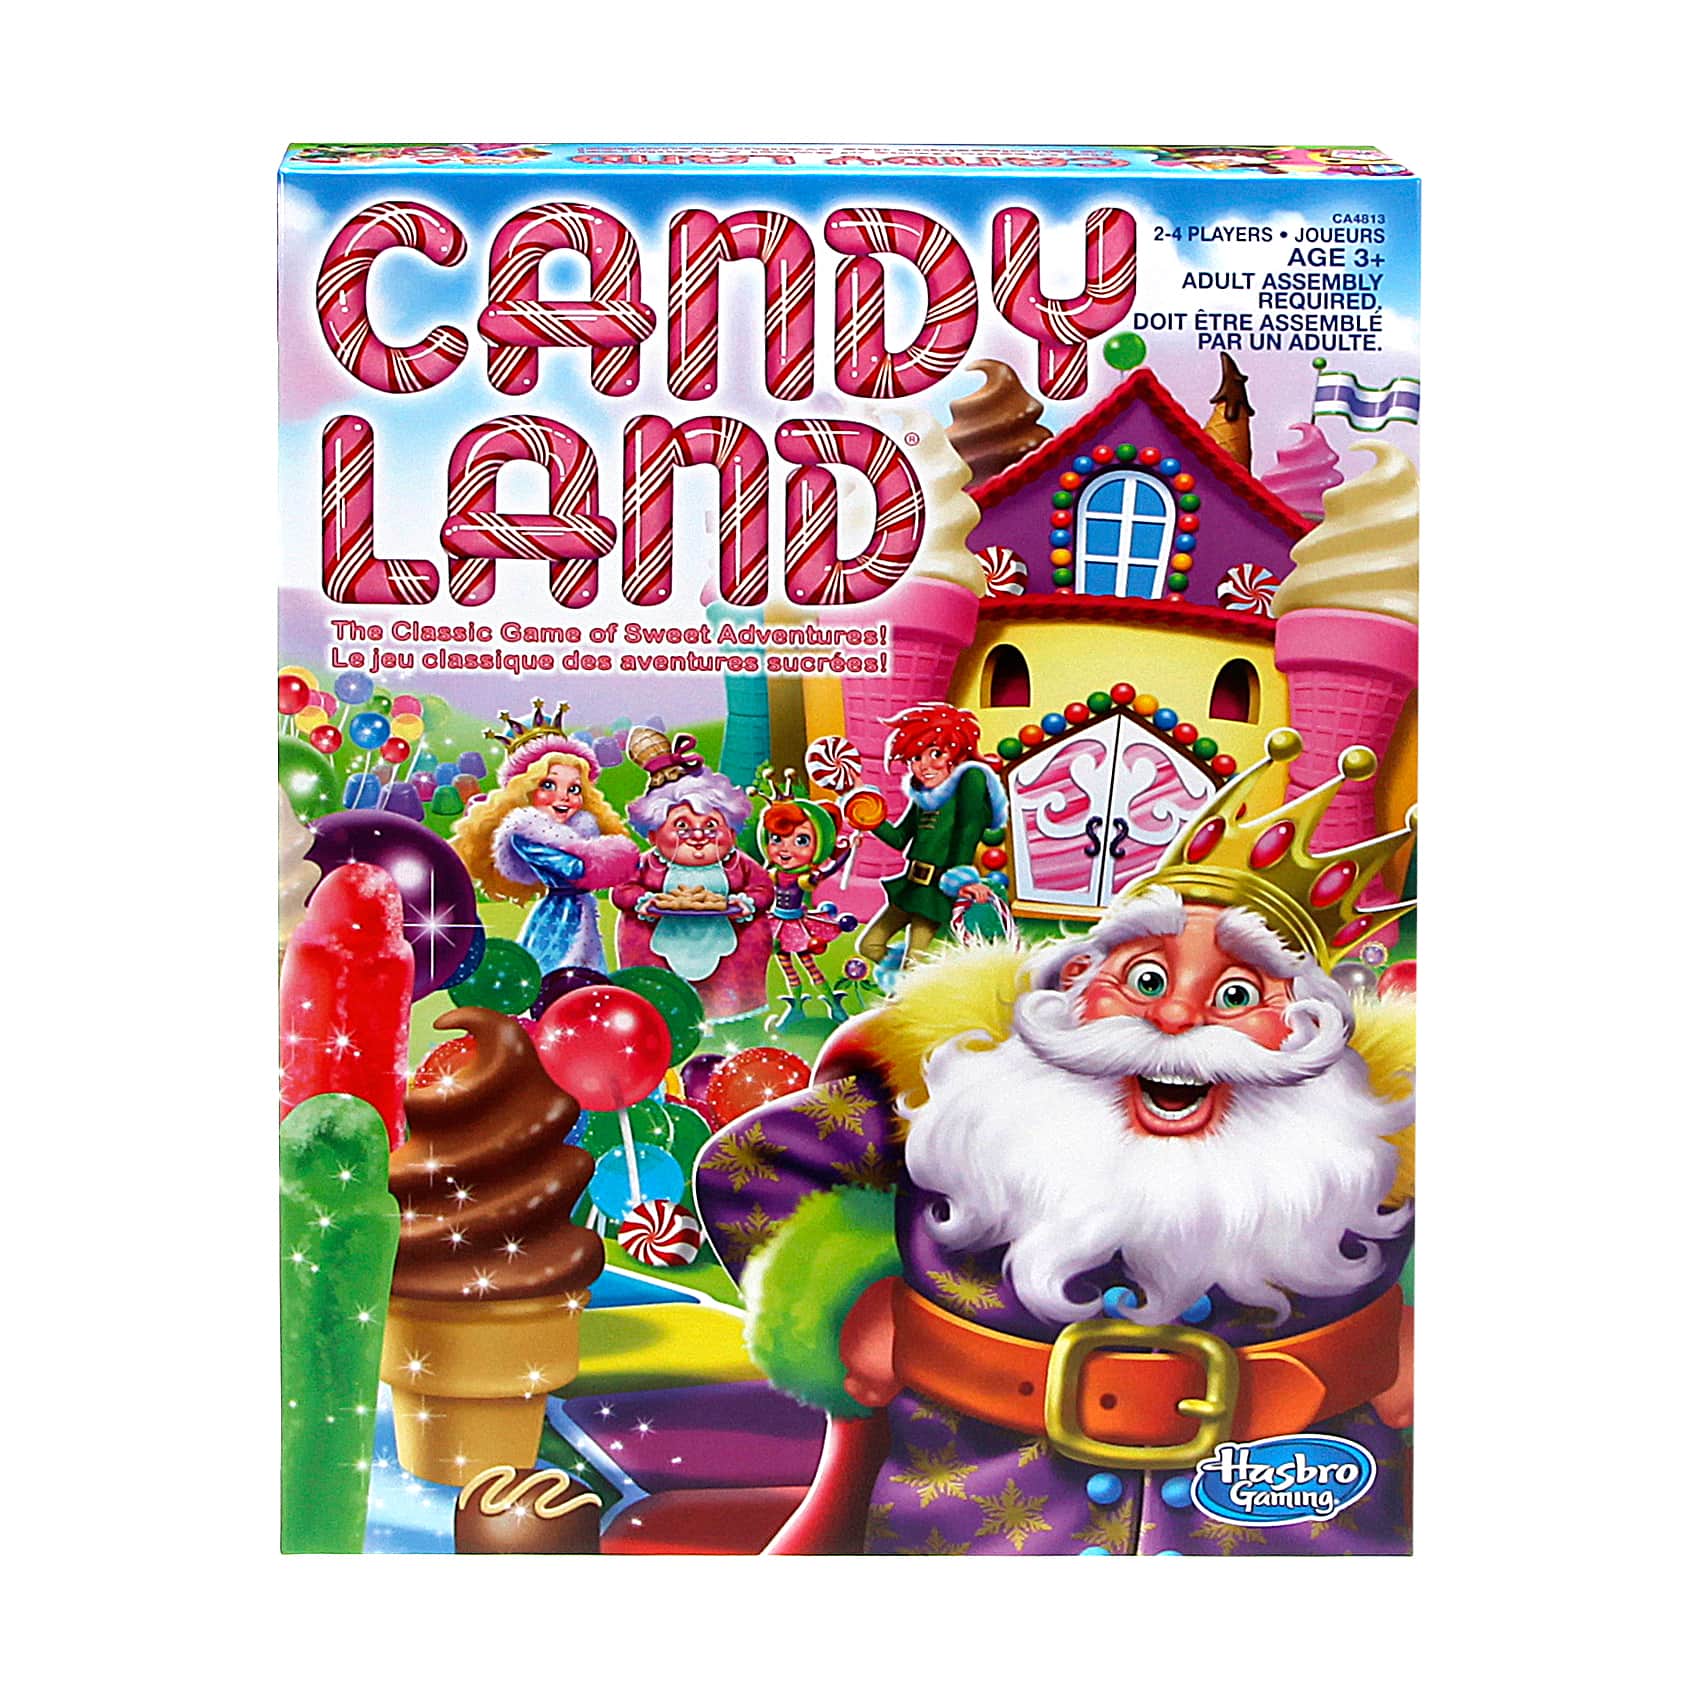 play candyland board game online